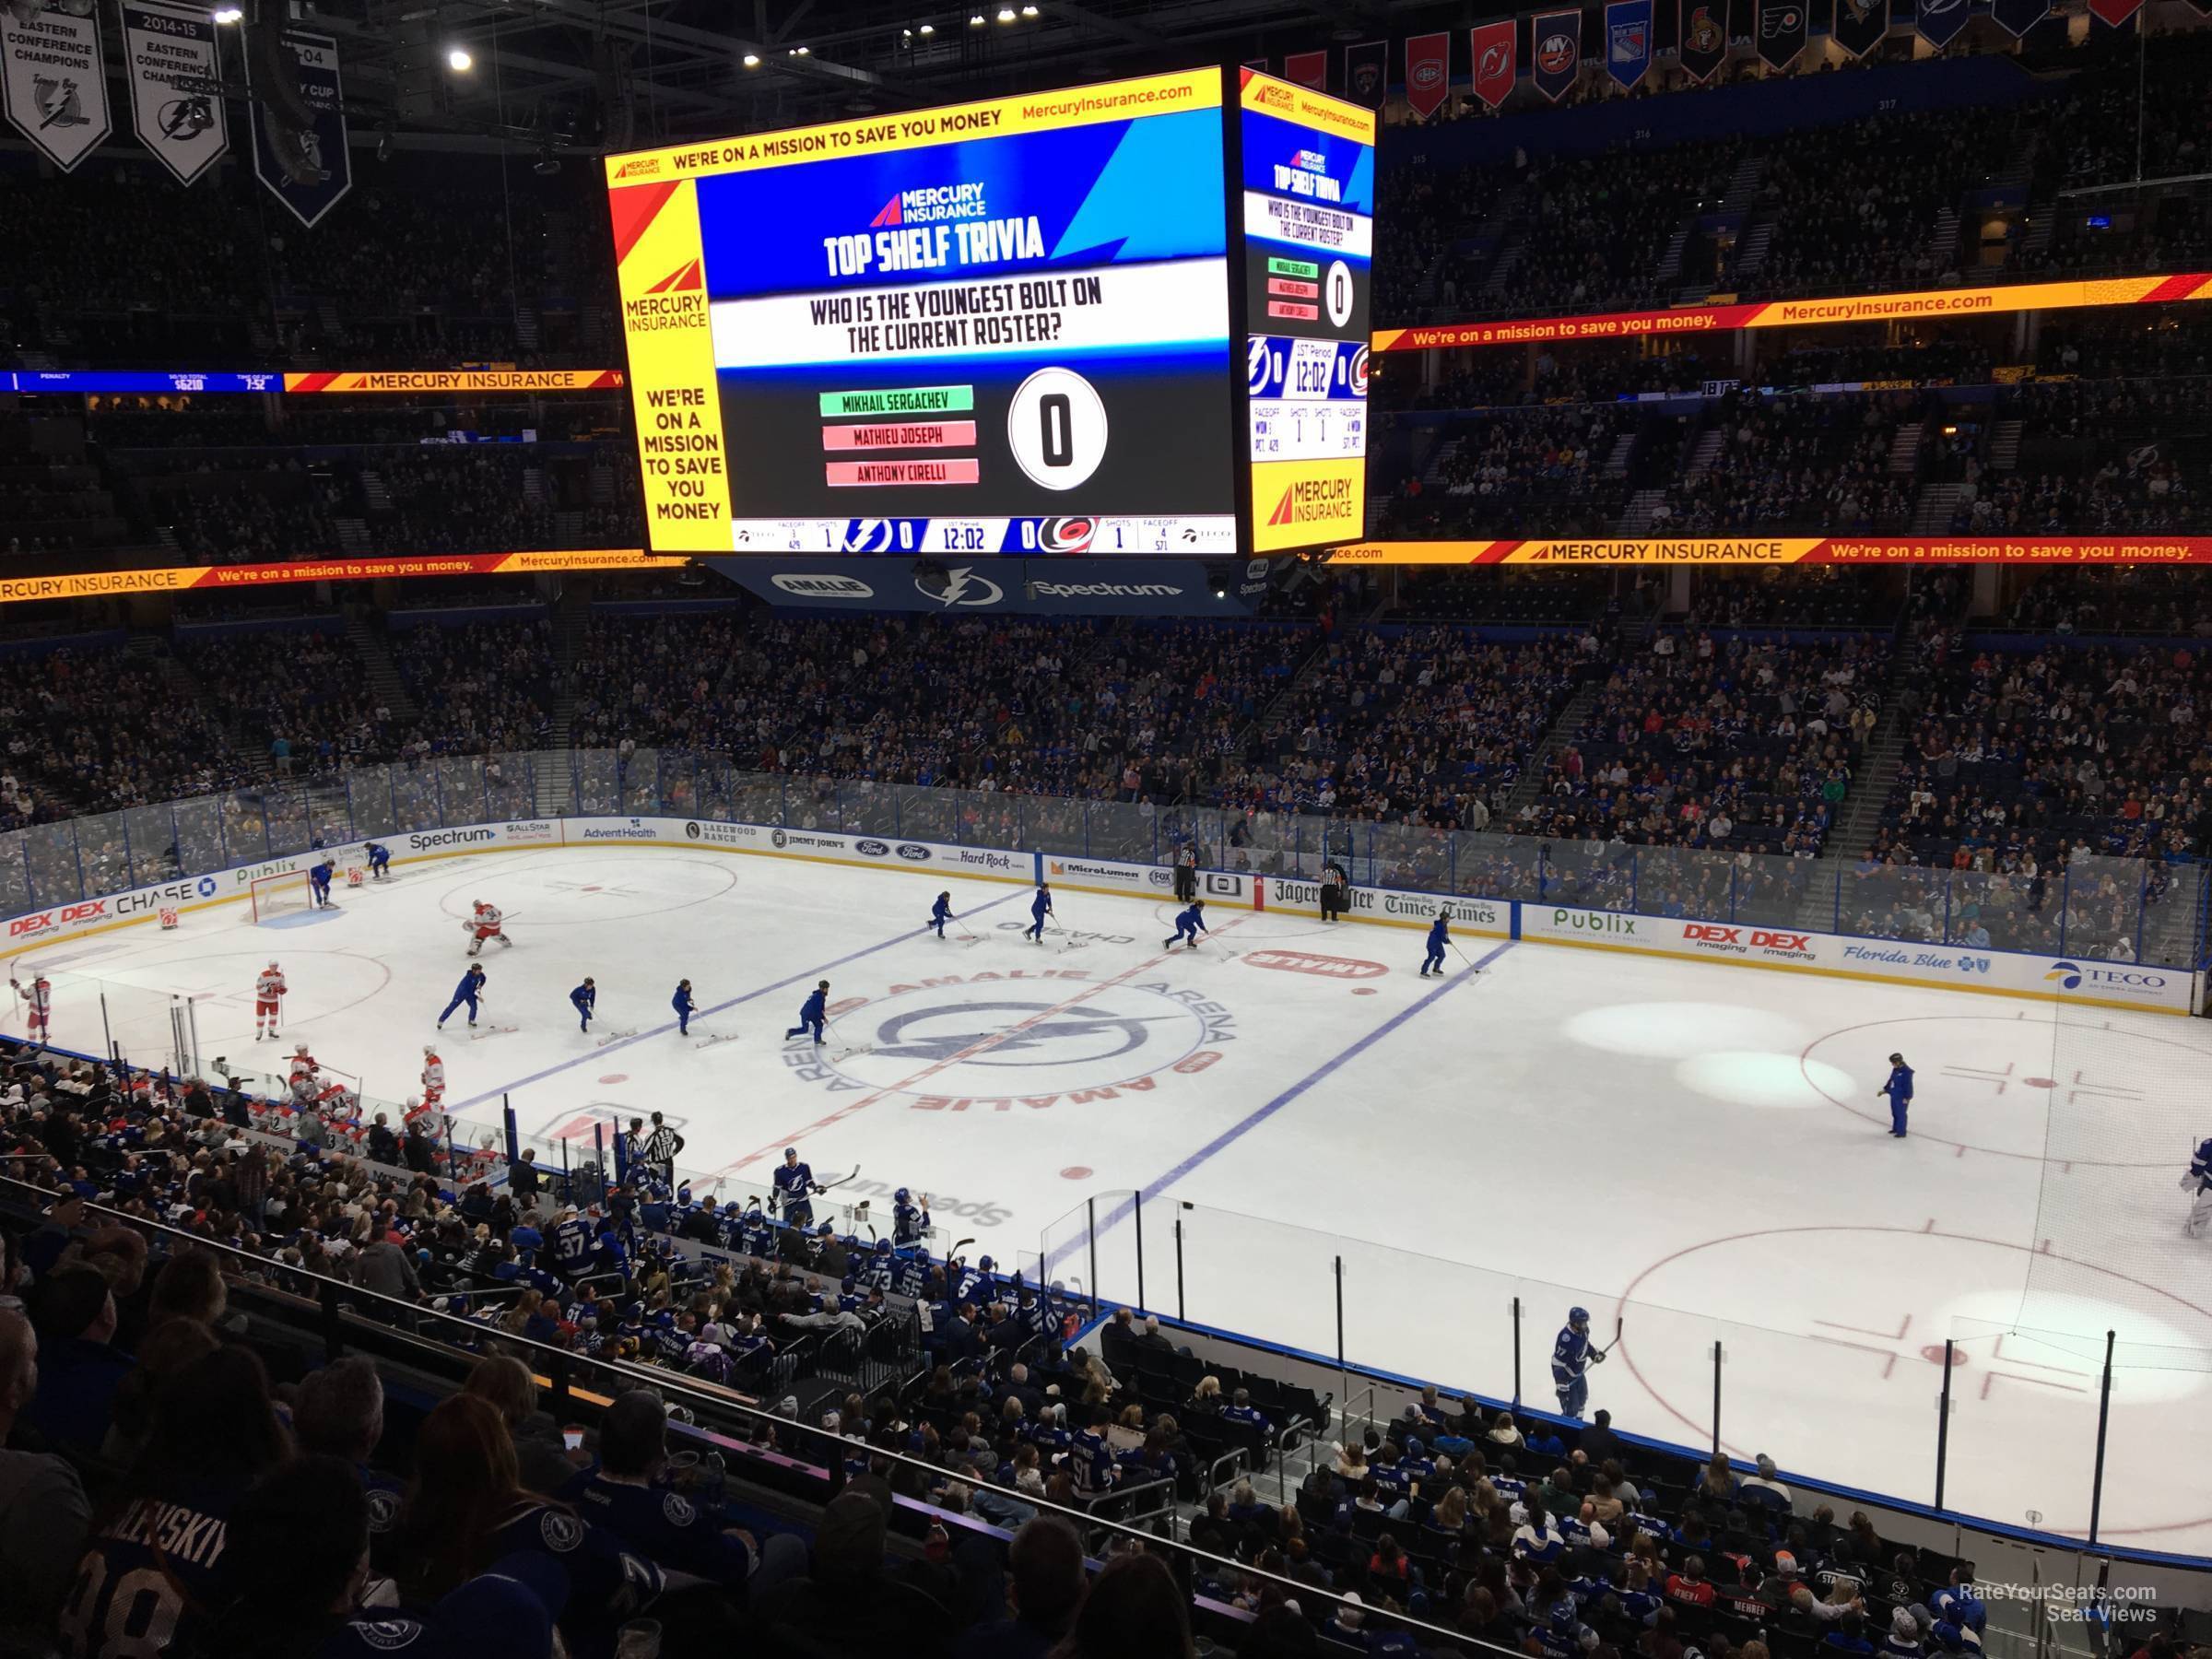 section 207 at amalie arena tampa｜TikTok Search